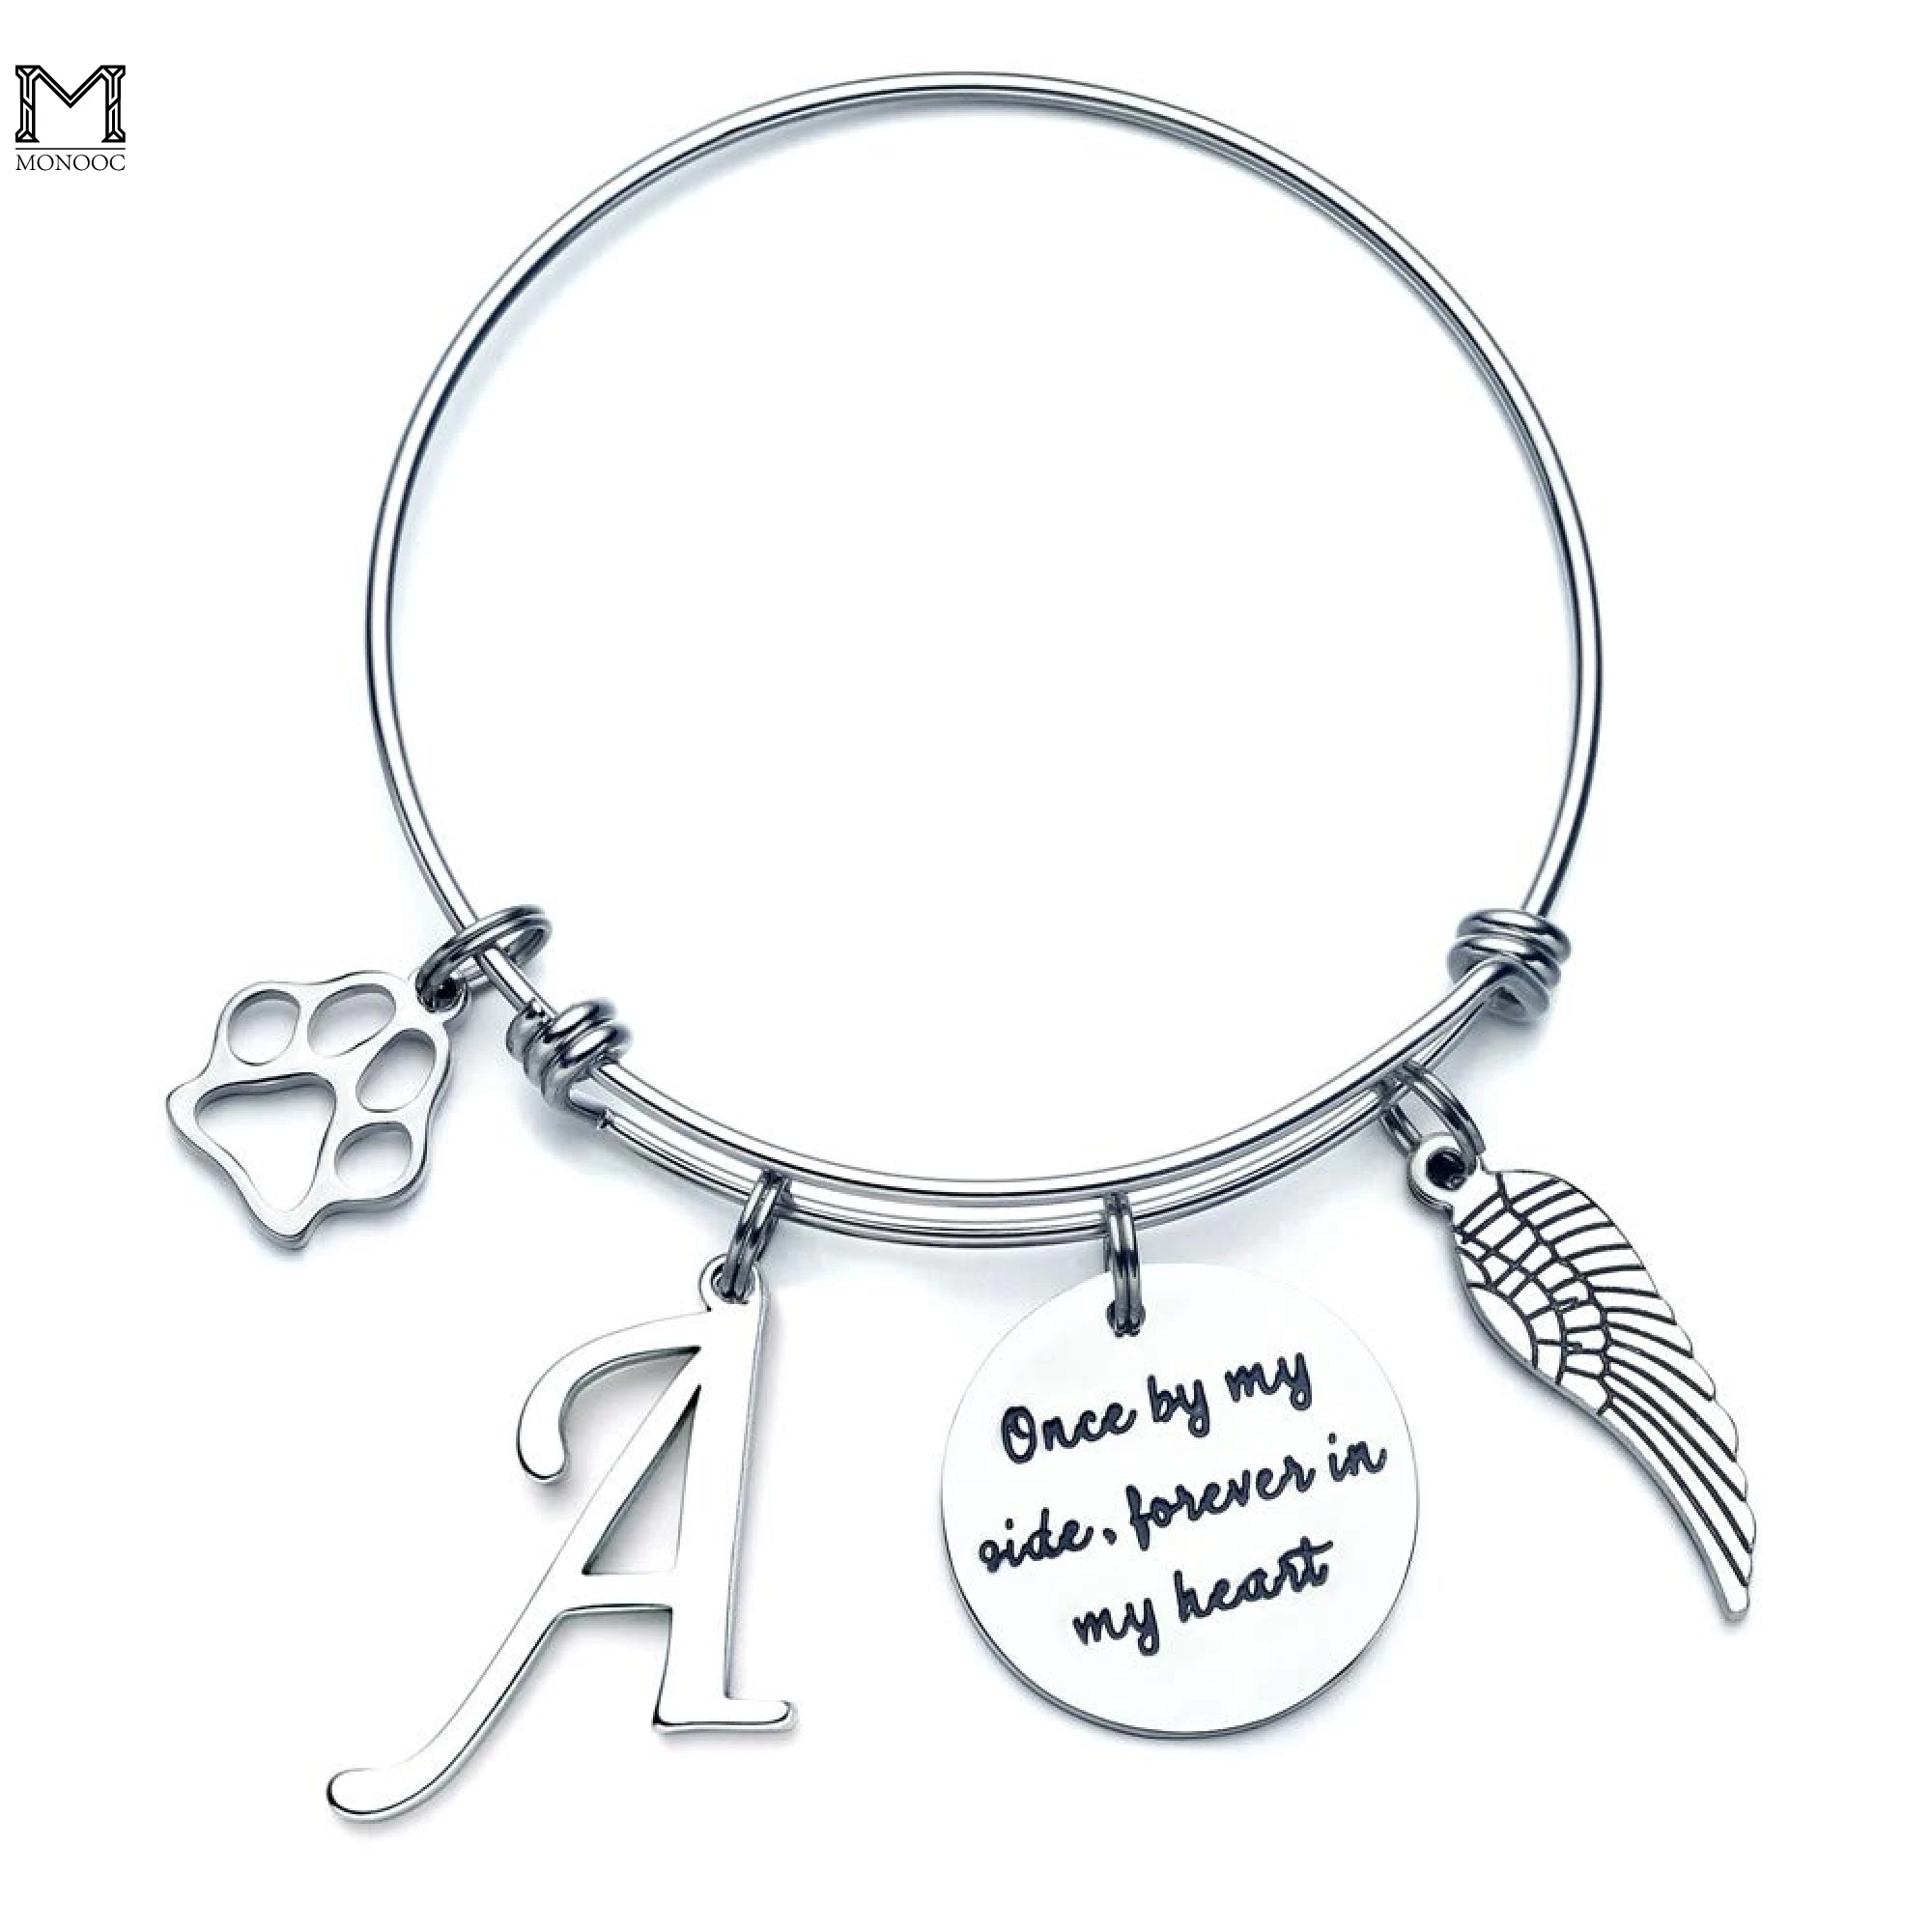 

MONOOC Loss of Pet Memorial Gift Bracelet Initial Charm Bracelet Once By My Side Forever In My Heart Jewelry Sympathy Condolence